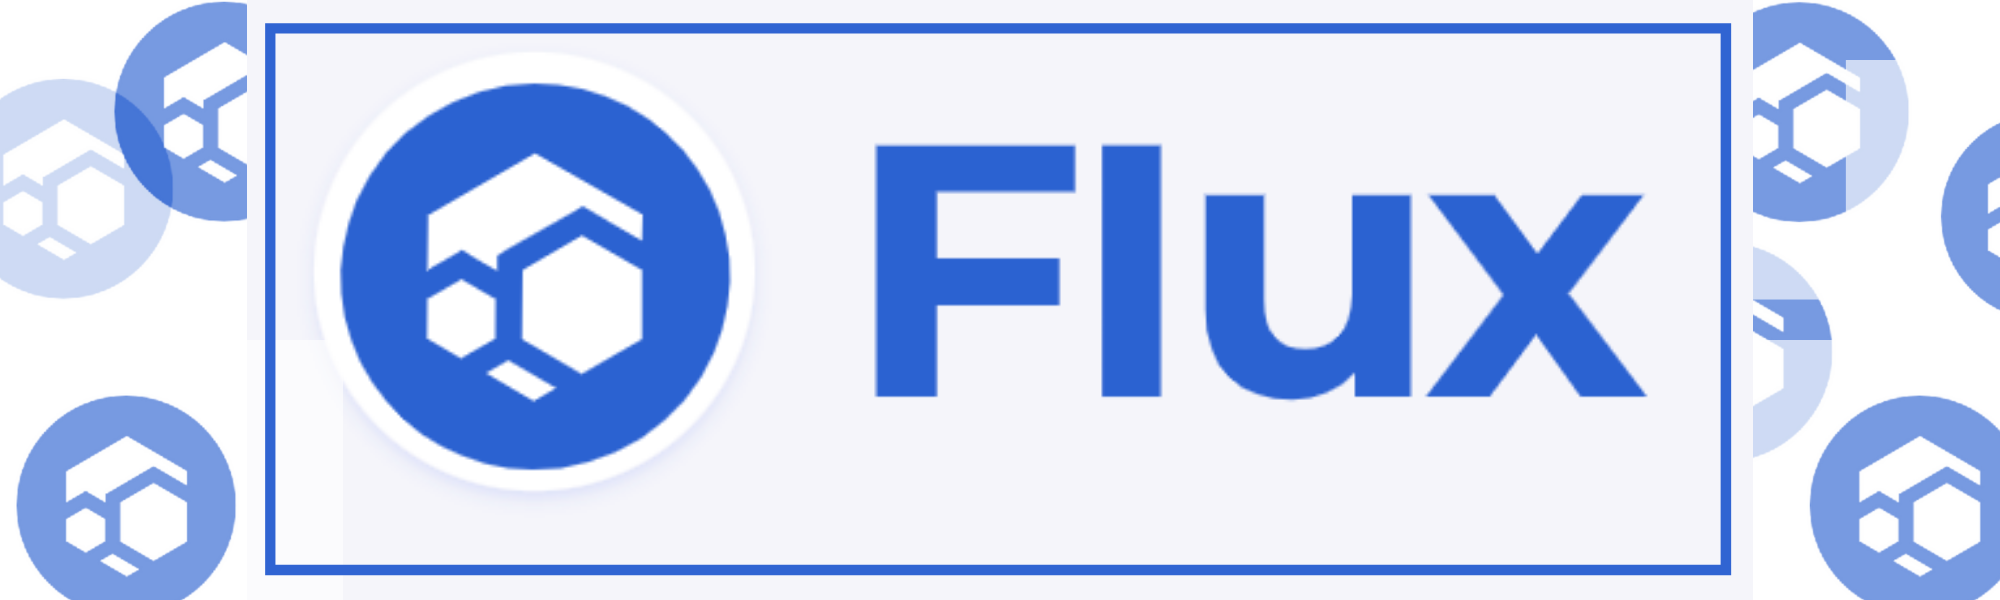 Flux Web 3.0 for Entrepreneurs Features Secure Data, Speed and is Affordable